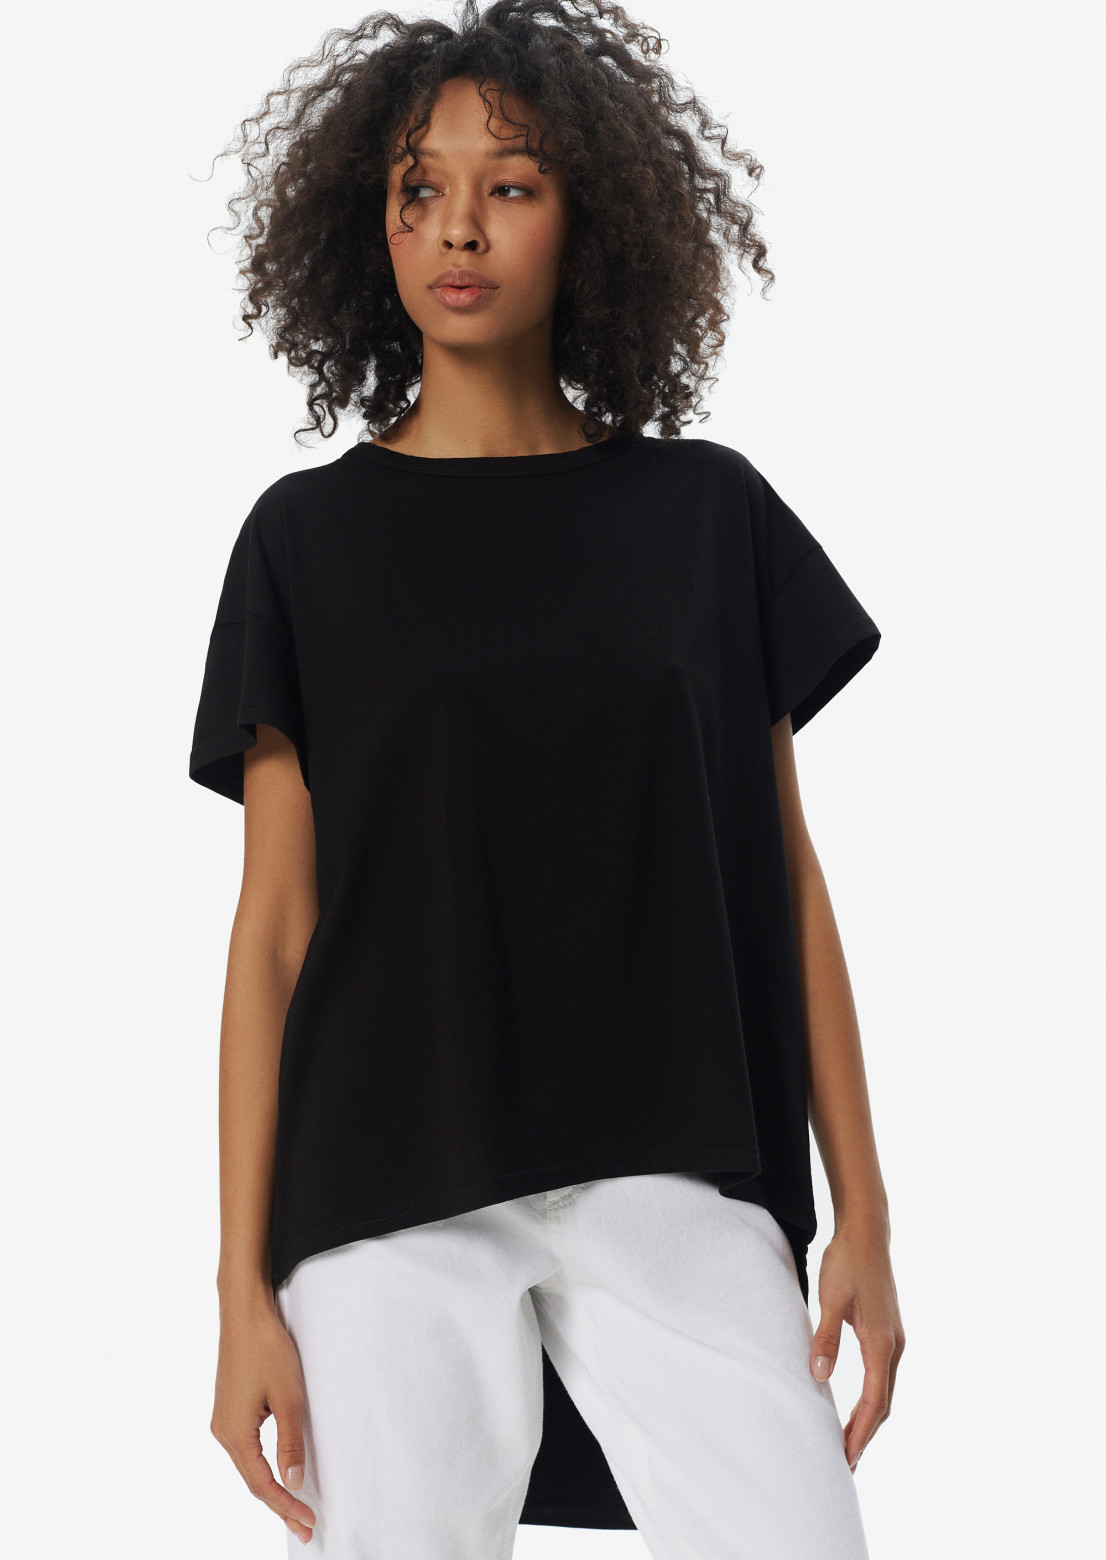 Black T-shirt with tail